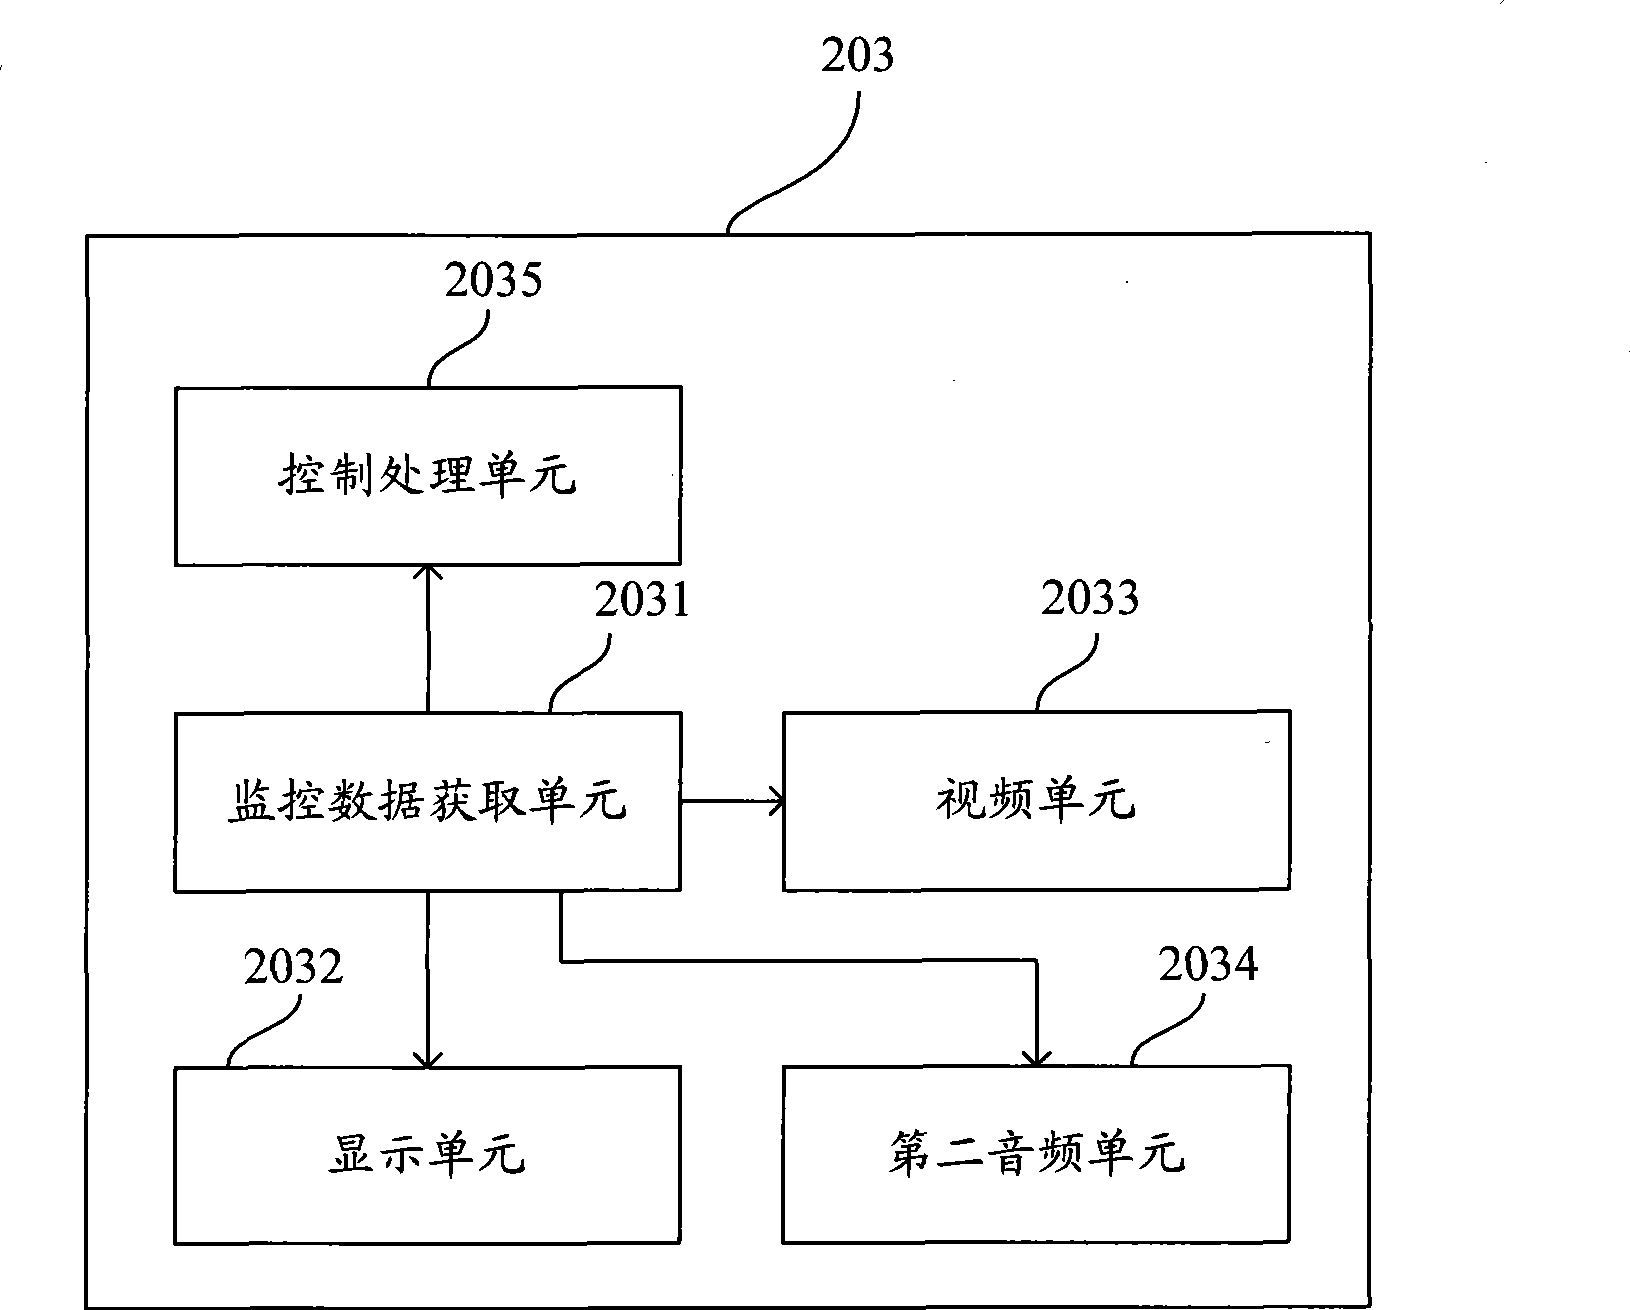 Nondestructive detecting device and detecting system